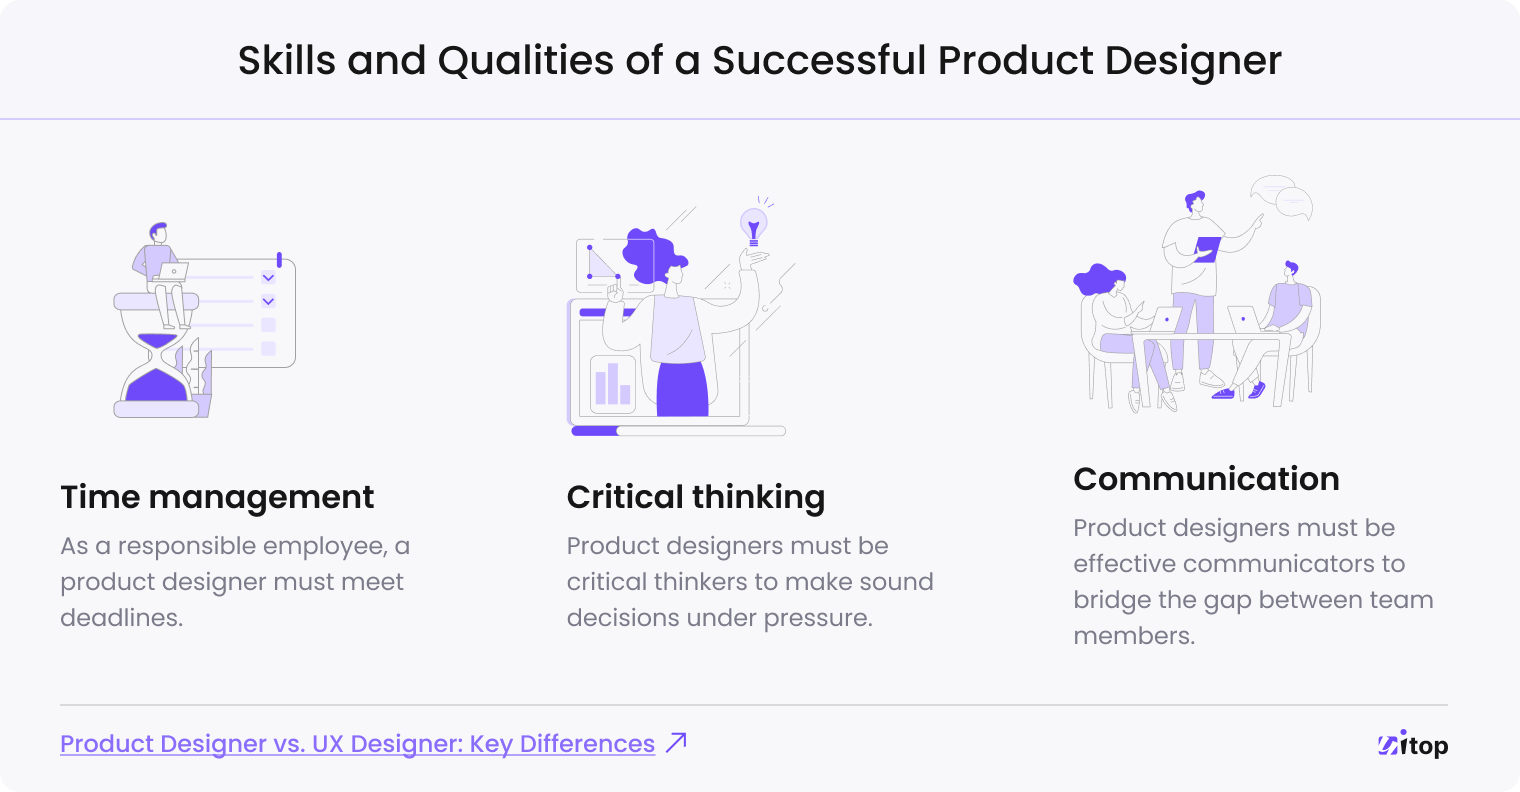 Skills and qualities of a successful product designer